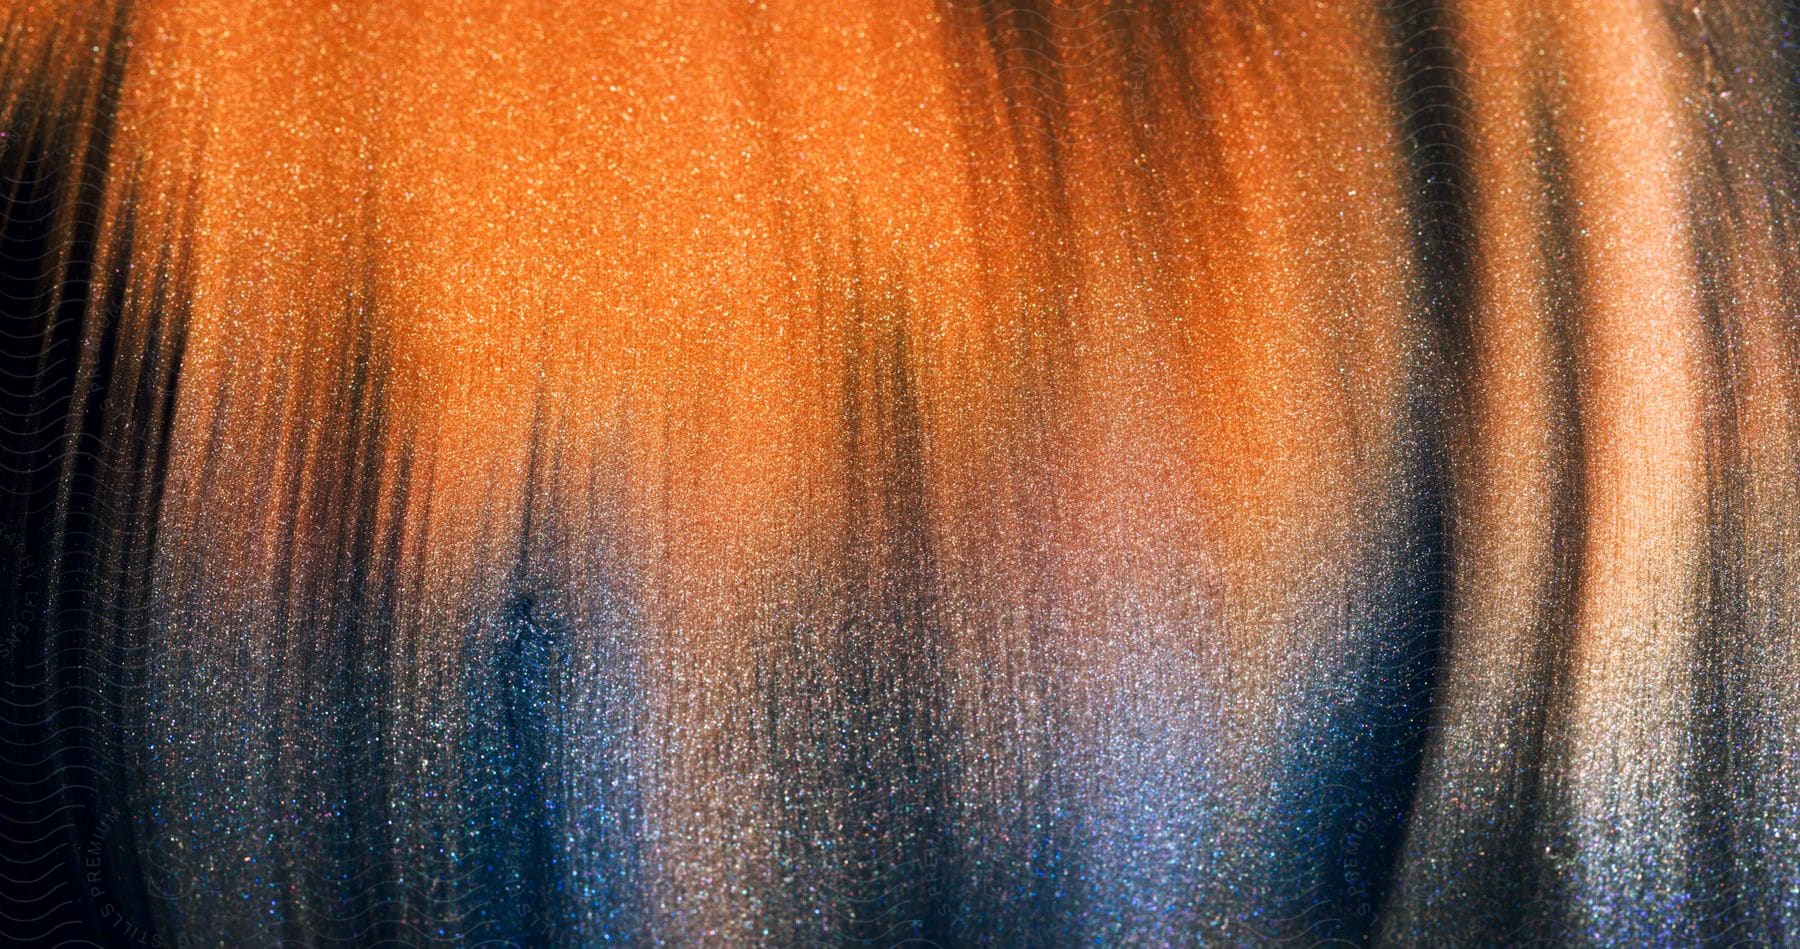 Close-up of abstract orange fluid painting